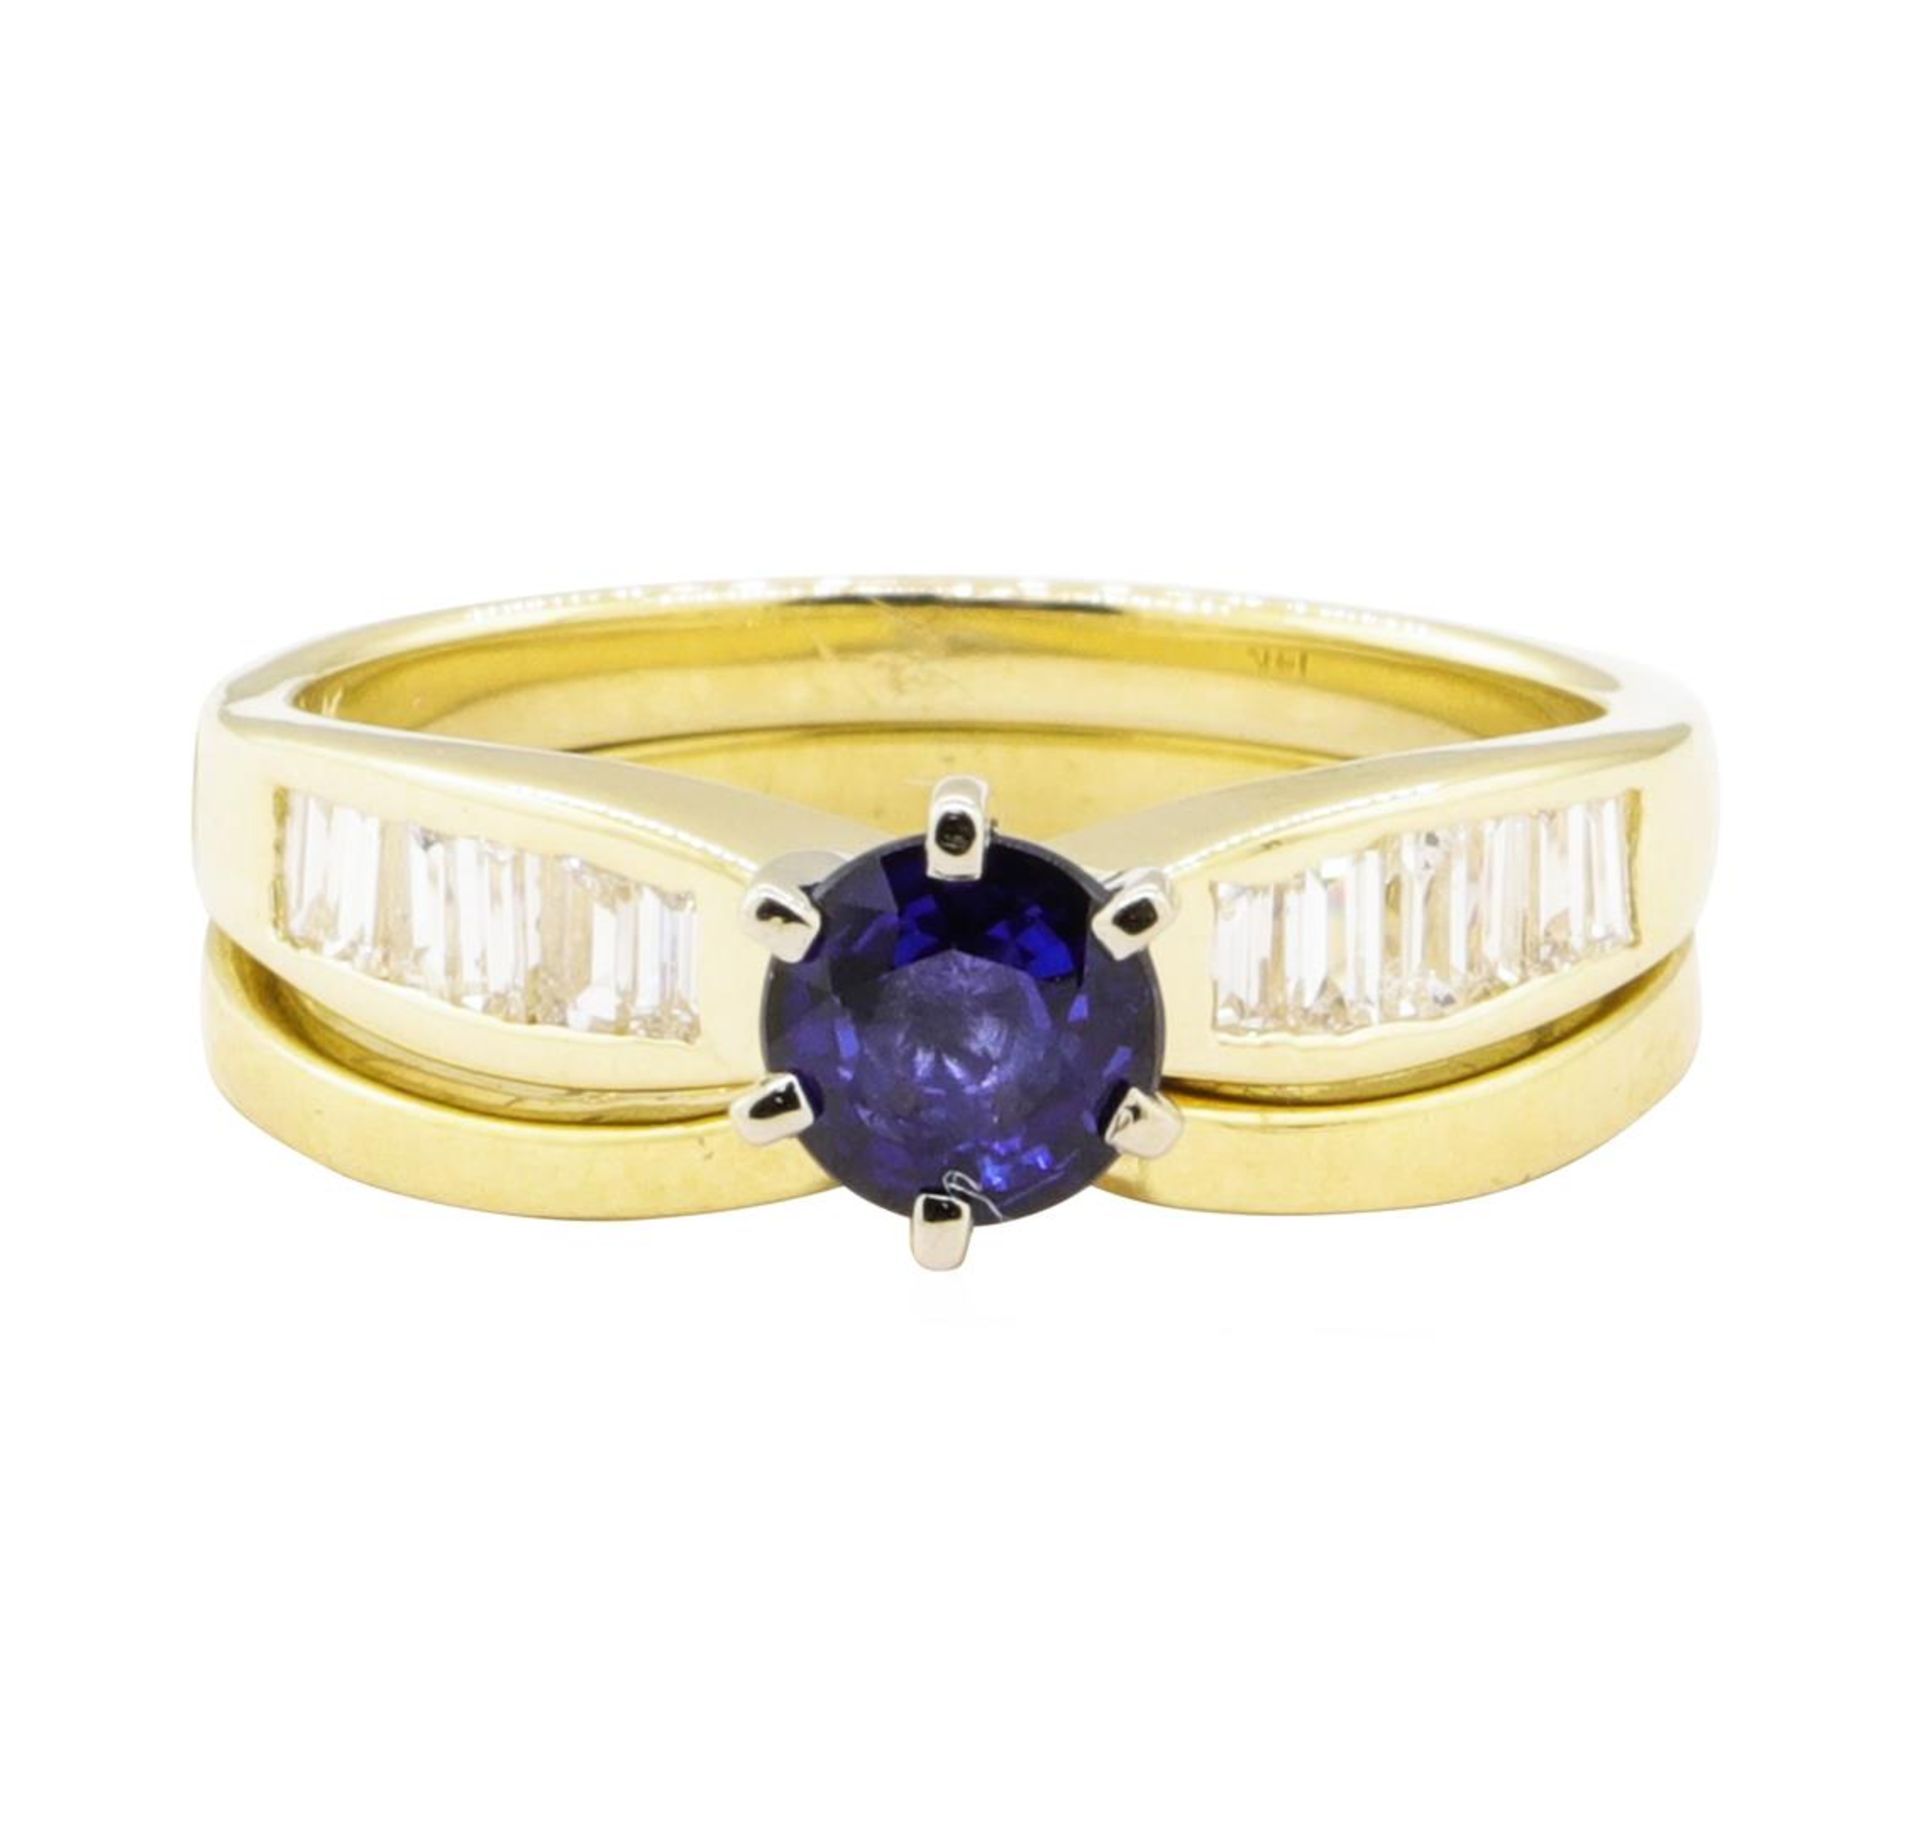 1.17ctw Blue Sapphire and Diamond Ring Set - 14KT Yellow Gold - Image 2 of 3